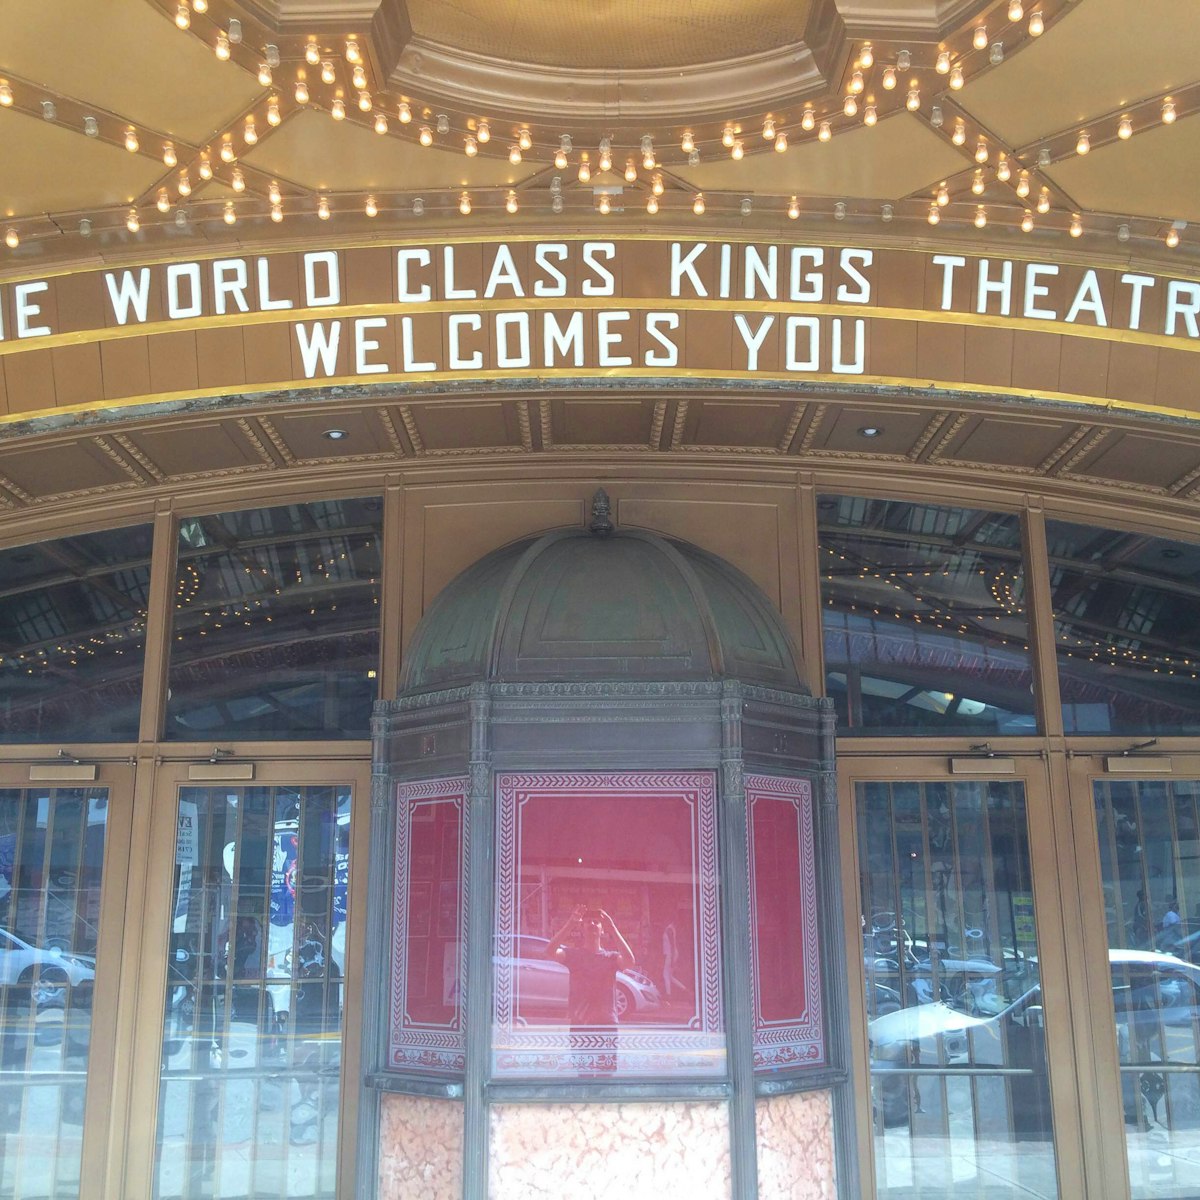 The front of the historic Kings Theater.